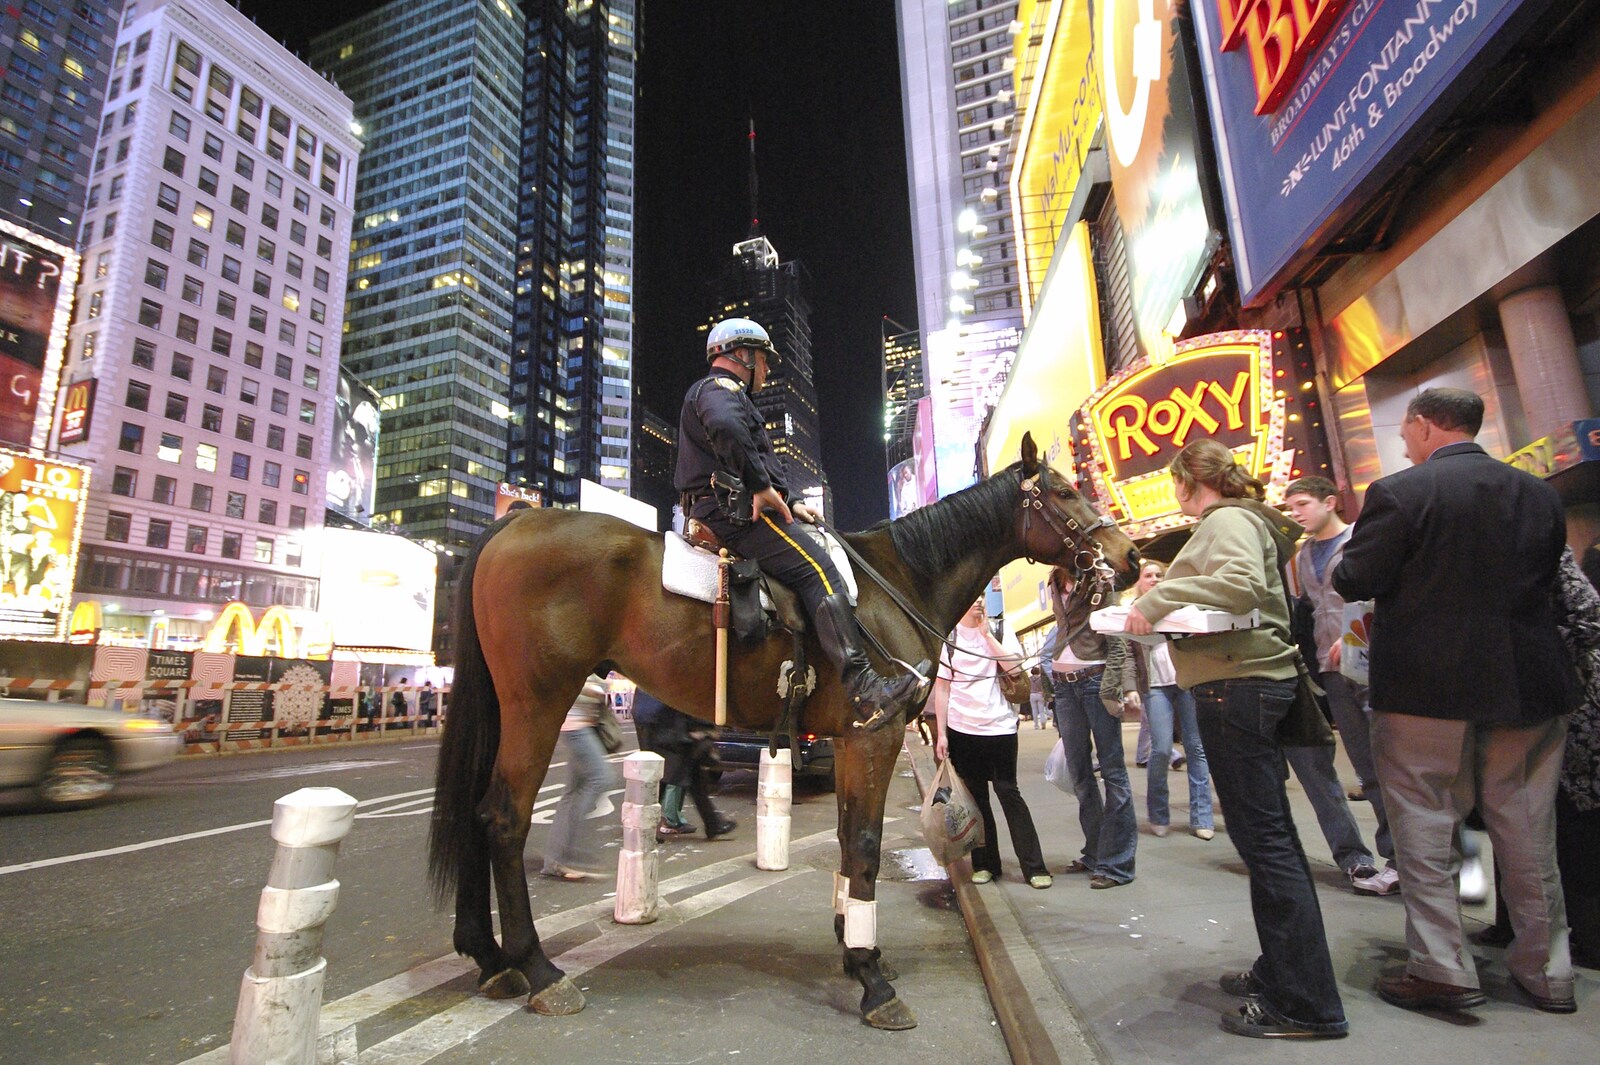 Isobel says hello to a police horse from A Central Park Marathon, Les Paul at the Iridium Club and an Empire State Sunset, New York, US - 25th March 2007